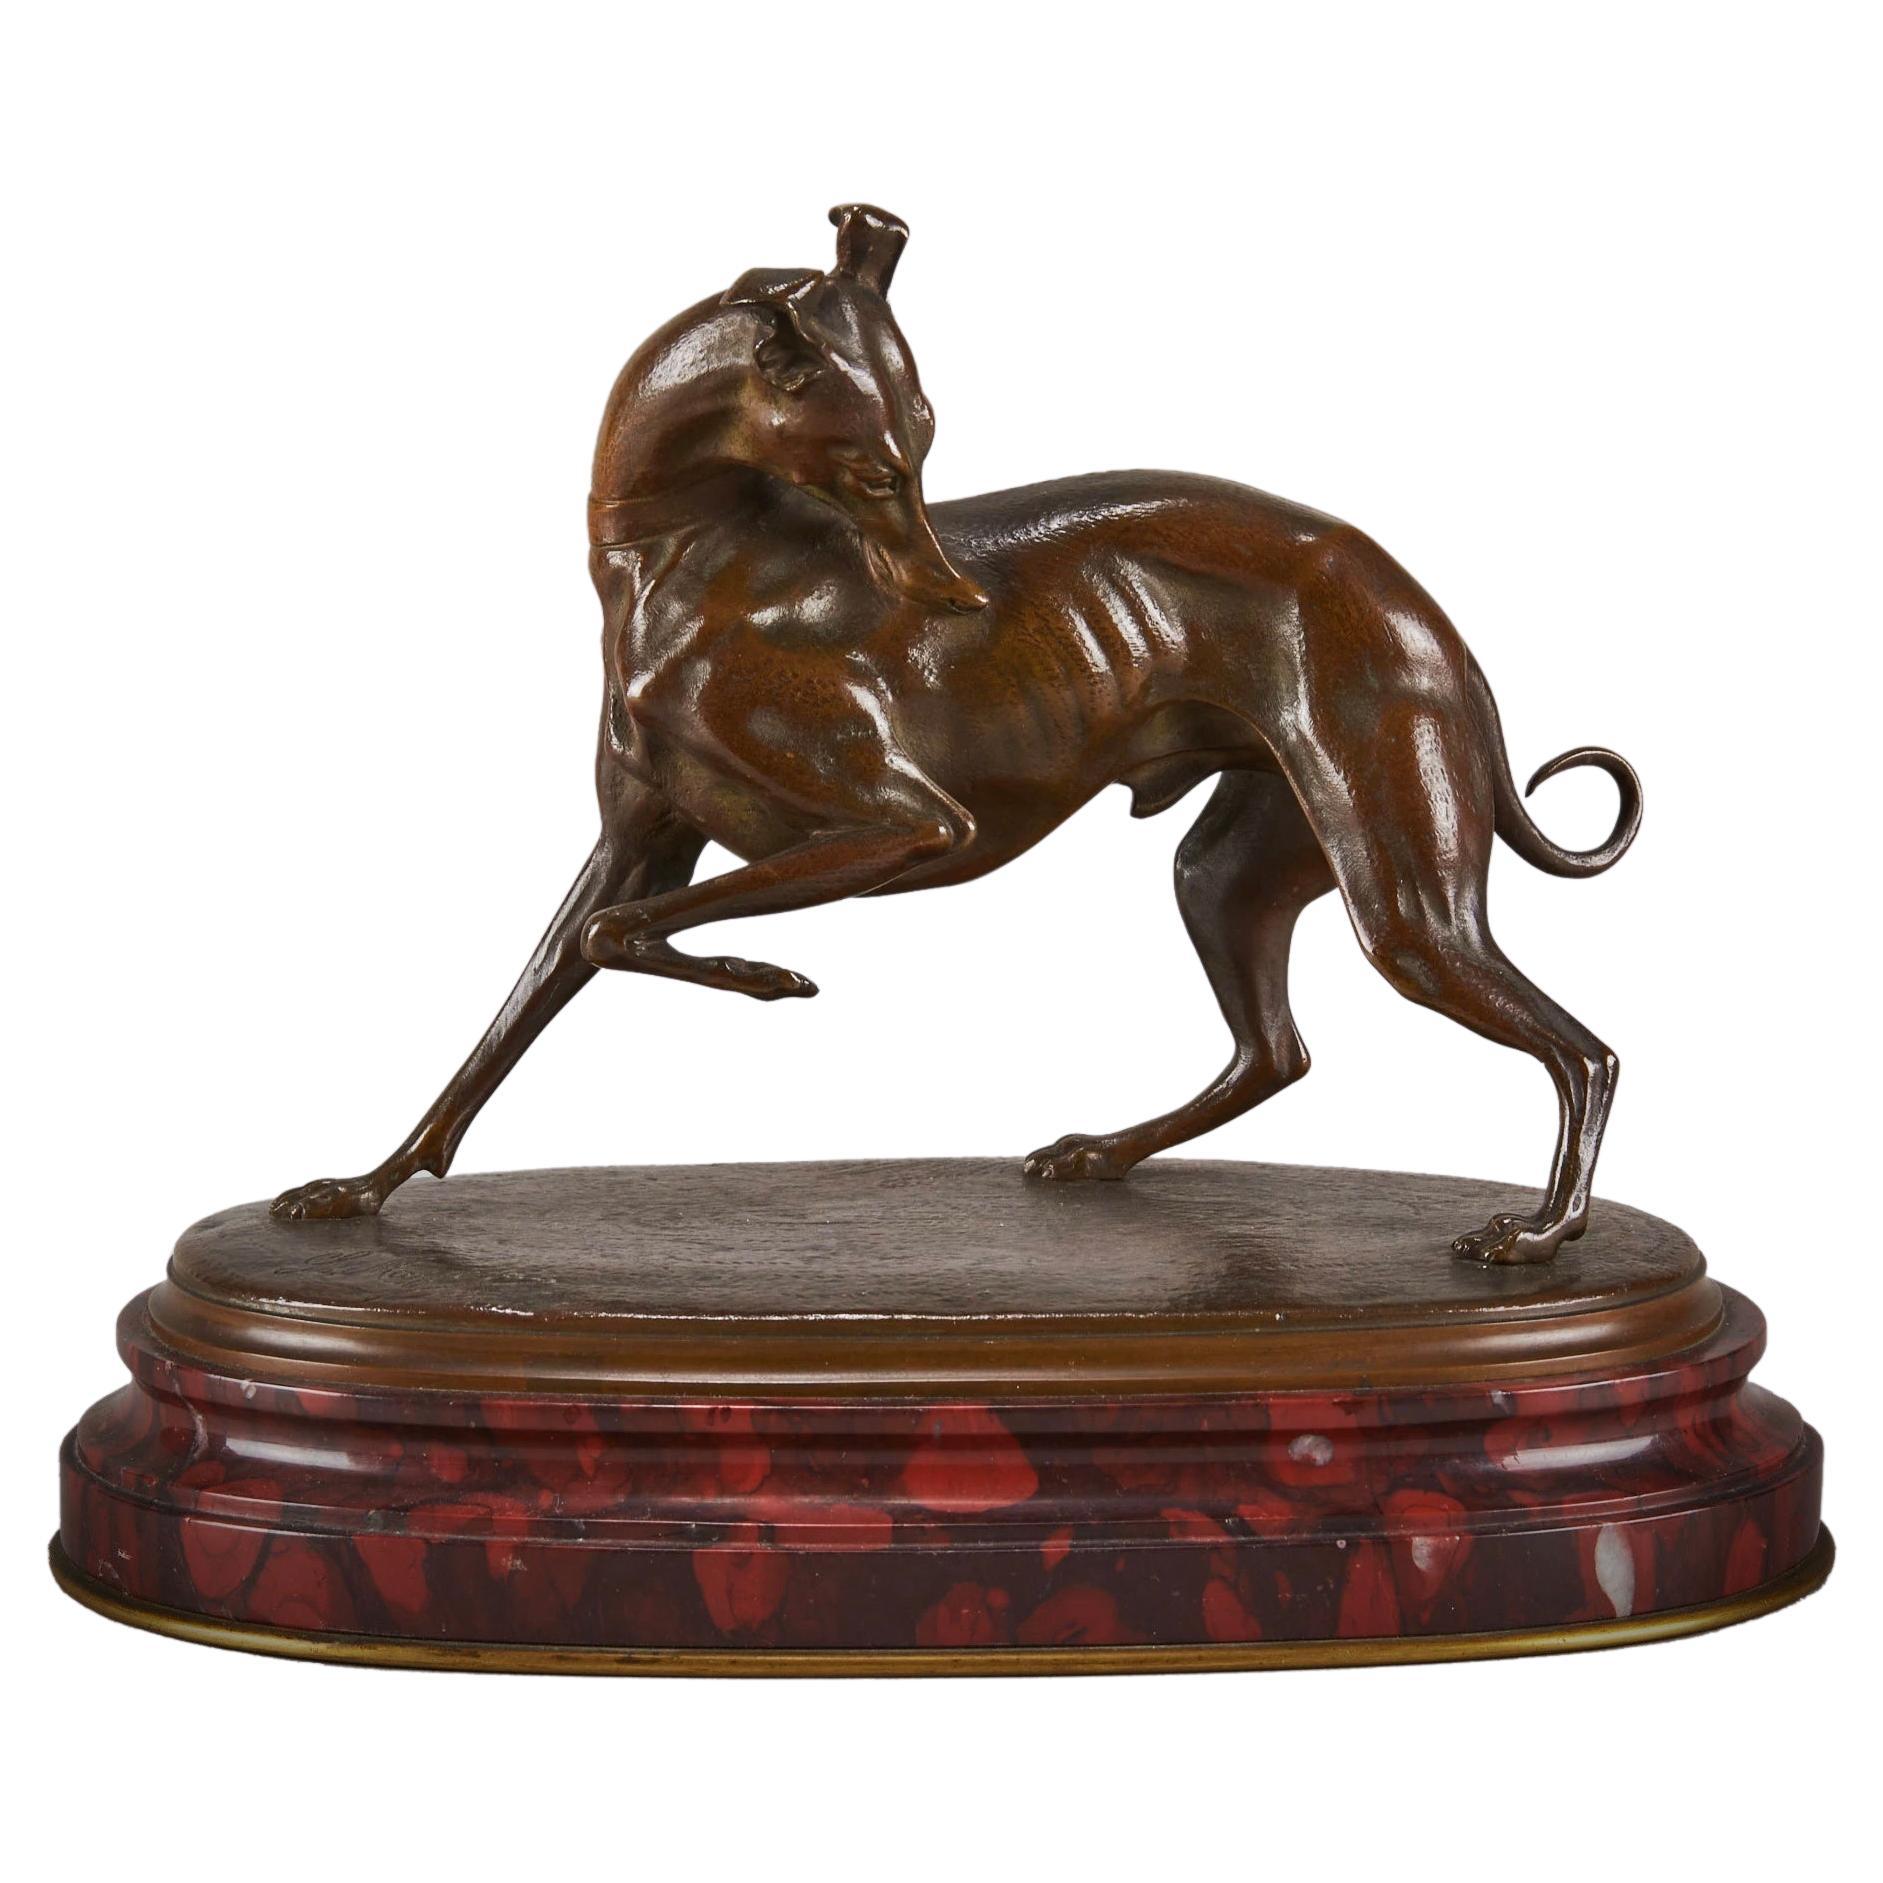 Late-19th Century French Animalier Bronze Entitled "Turning Whippet" by L Mayer